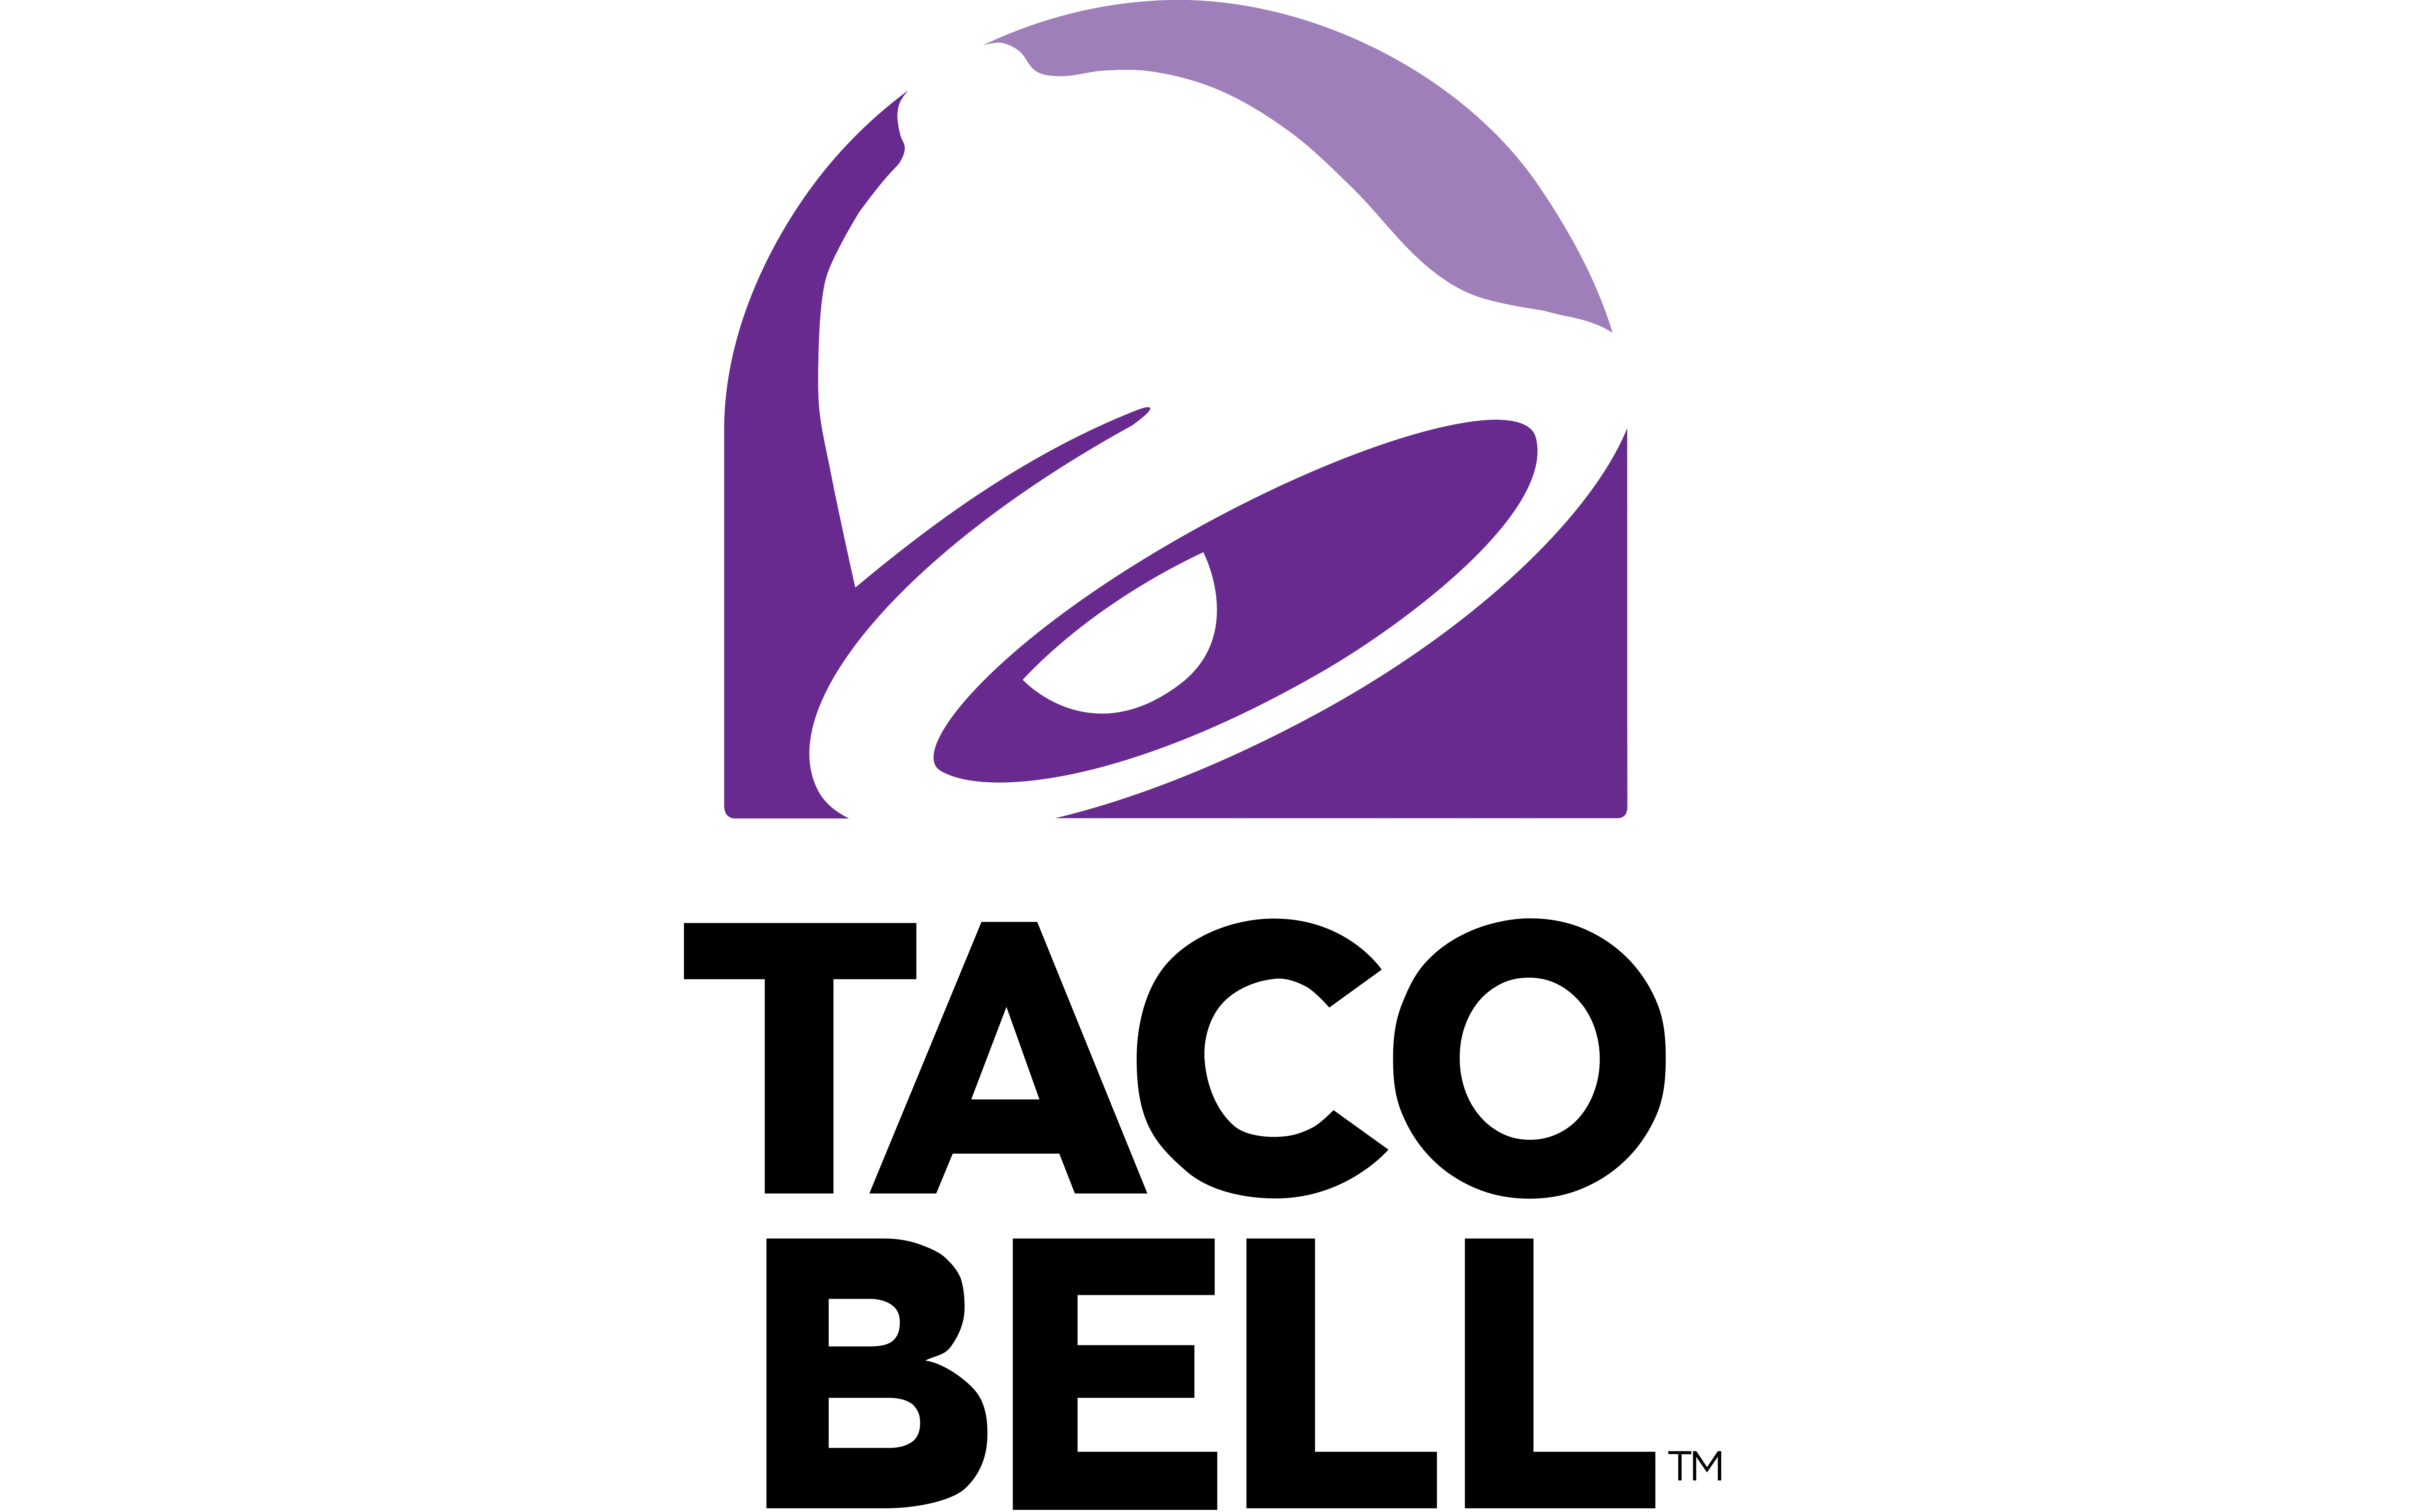 Meaning Taco Bell logo and symbol | history and evolution